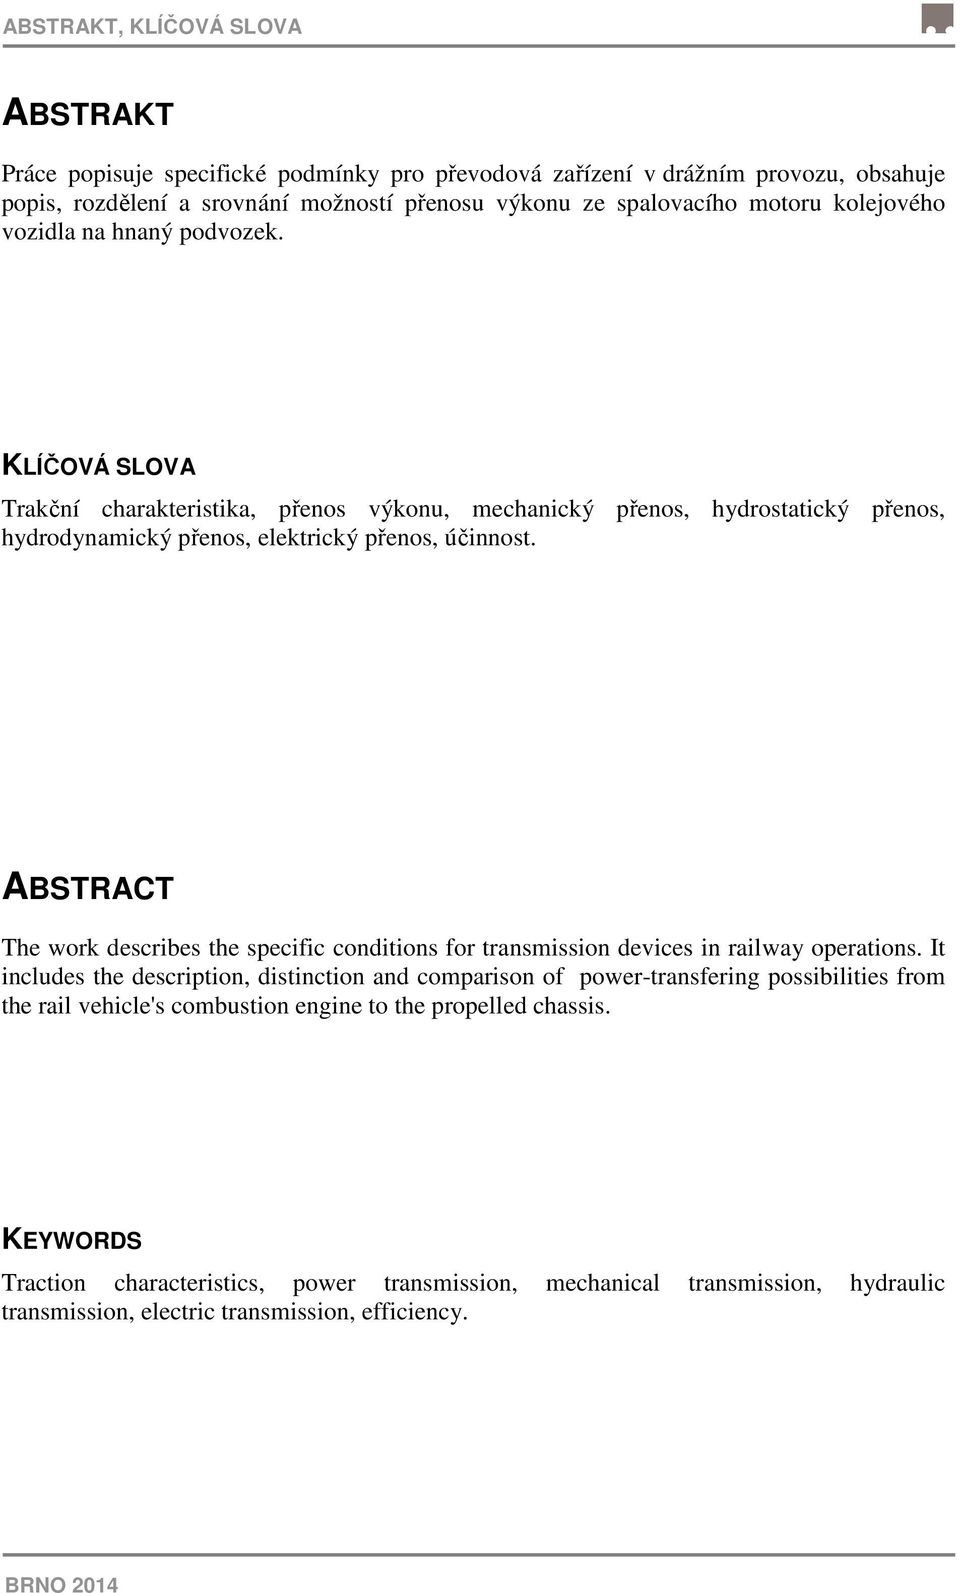 ABSTRACT The work describes the specific conditions for transmission devices in railway operations.